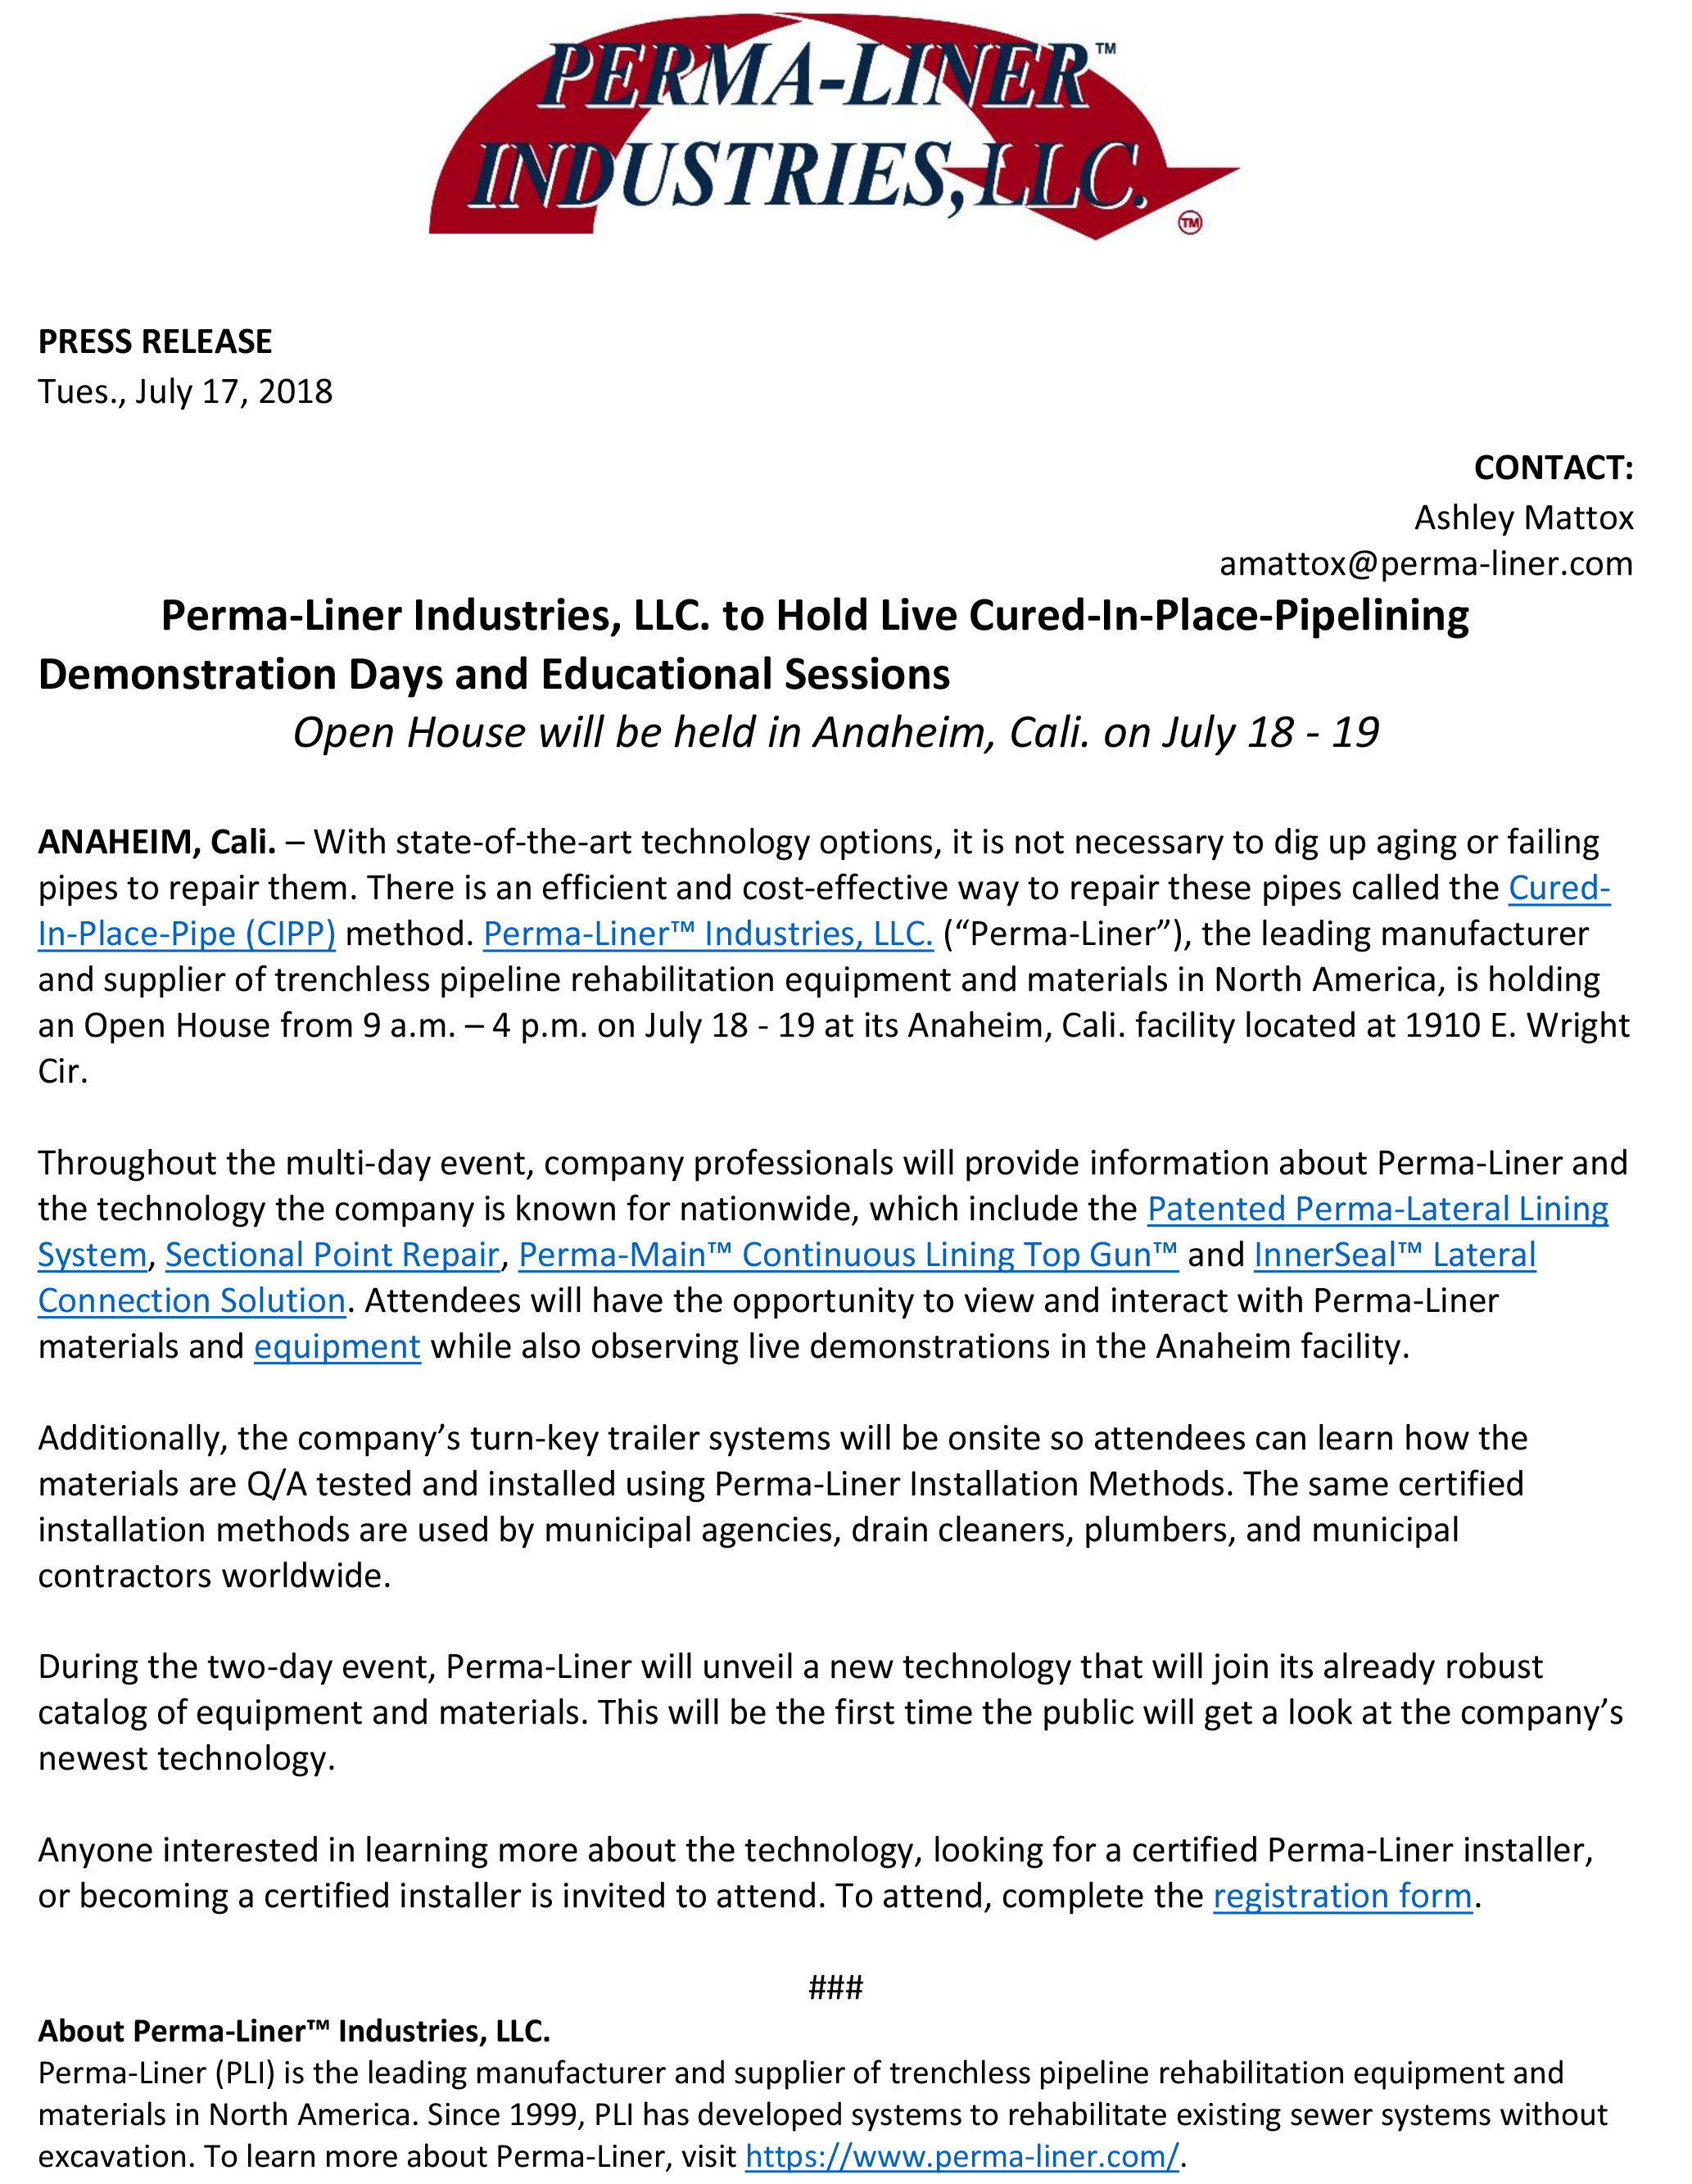 PERMA-LINER INDUSTRIES, LLC. TO HOLD LIVE CURED-IN-PLACE-PIPELINING DEMONSTRATION DAYS AND EDUCATION